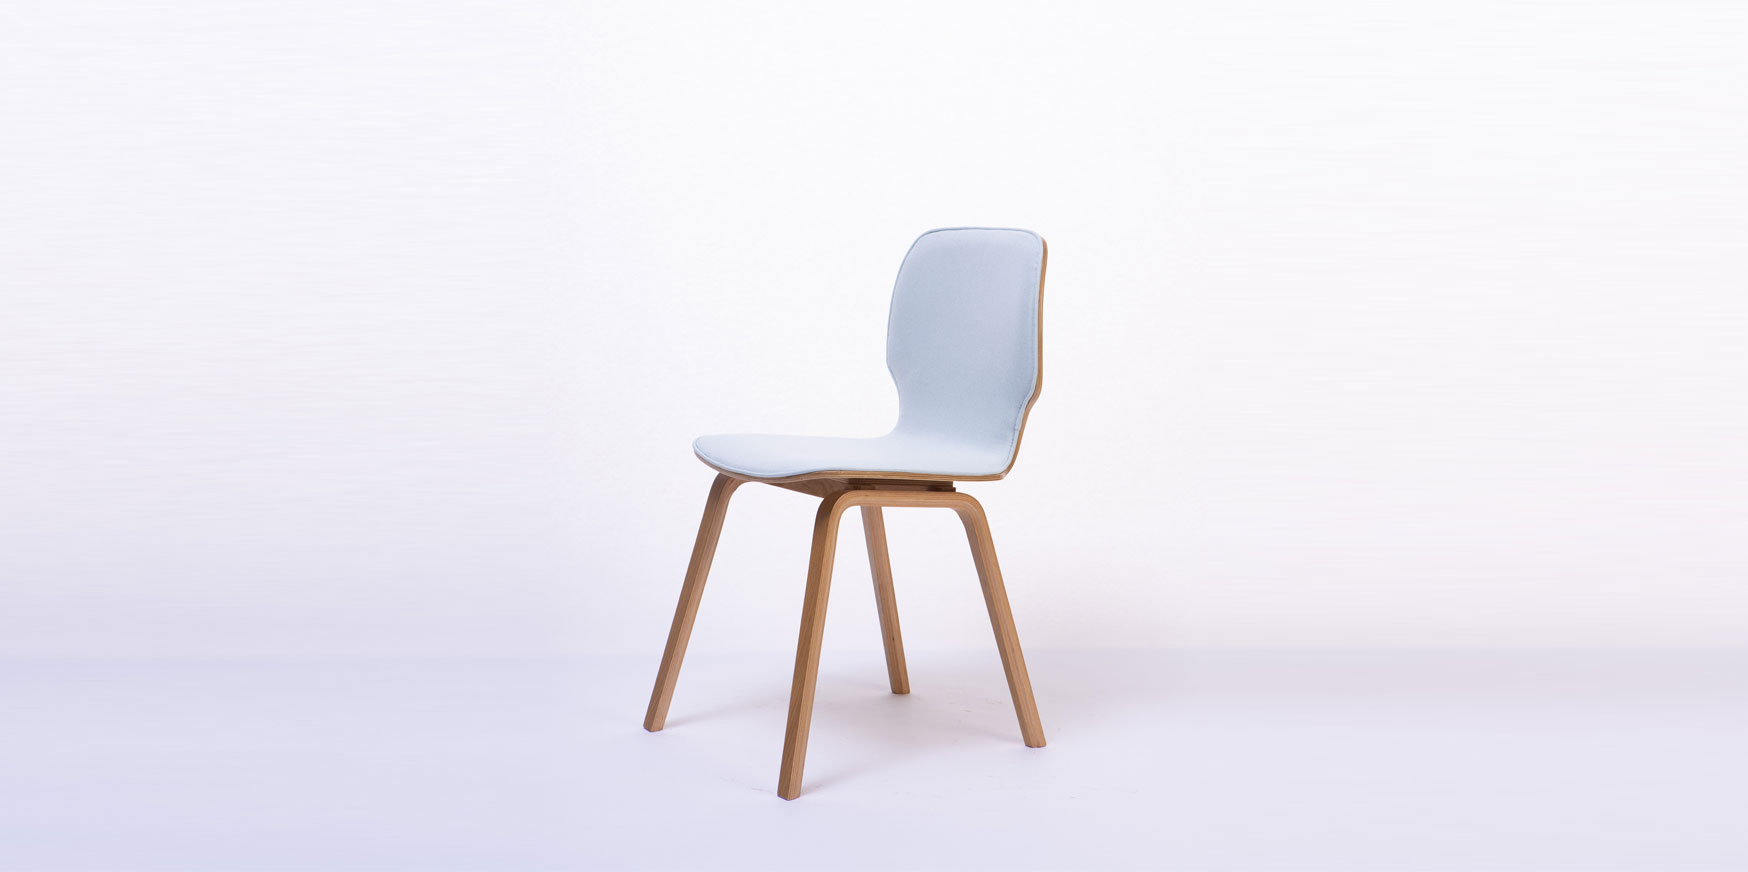 dining wooden chair price
